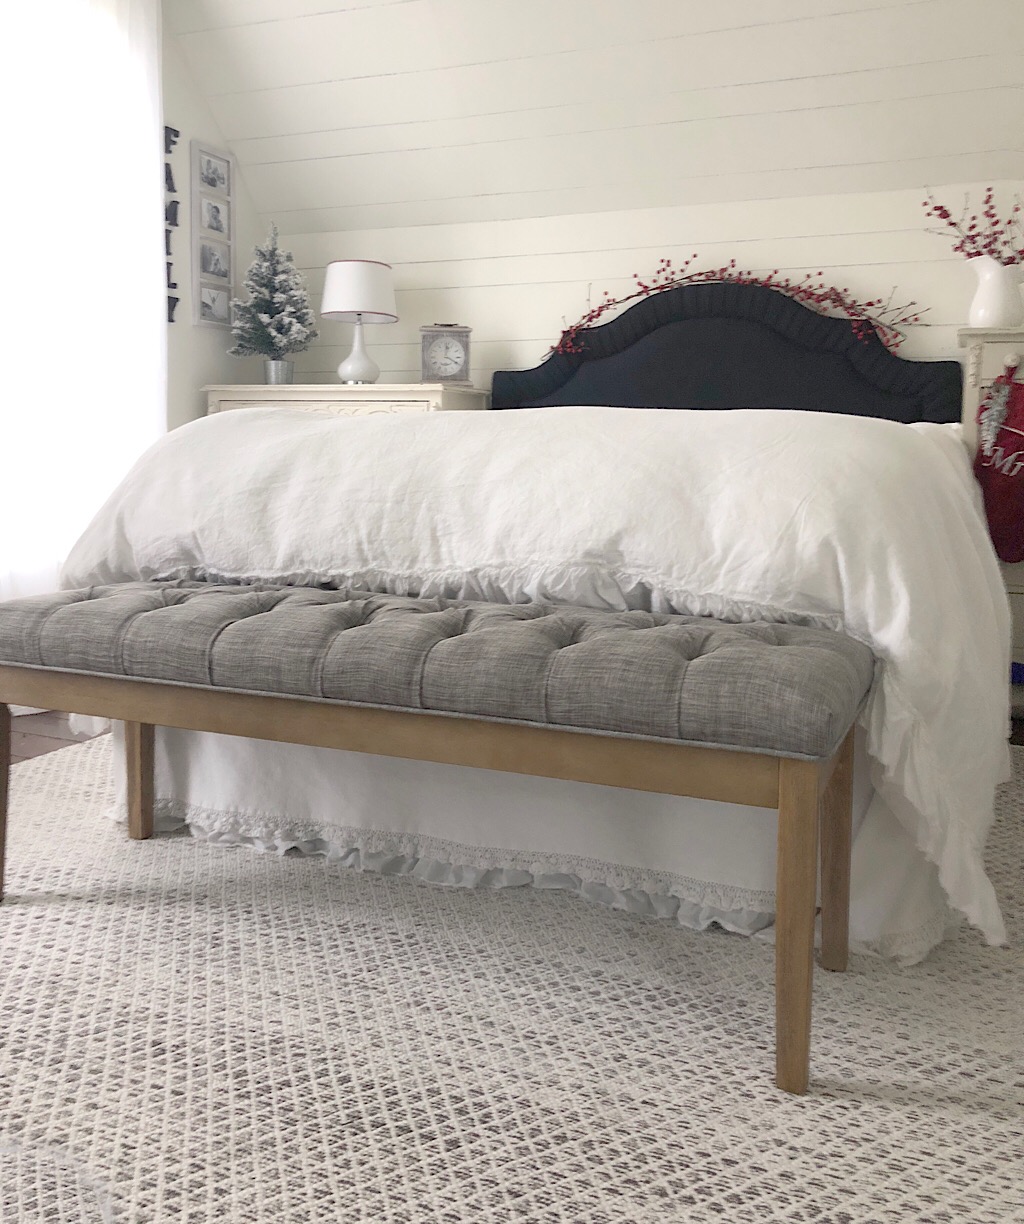 Make Your Perfect Bed -Bed Bath and Beyond-10